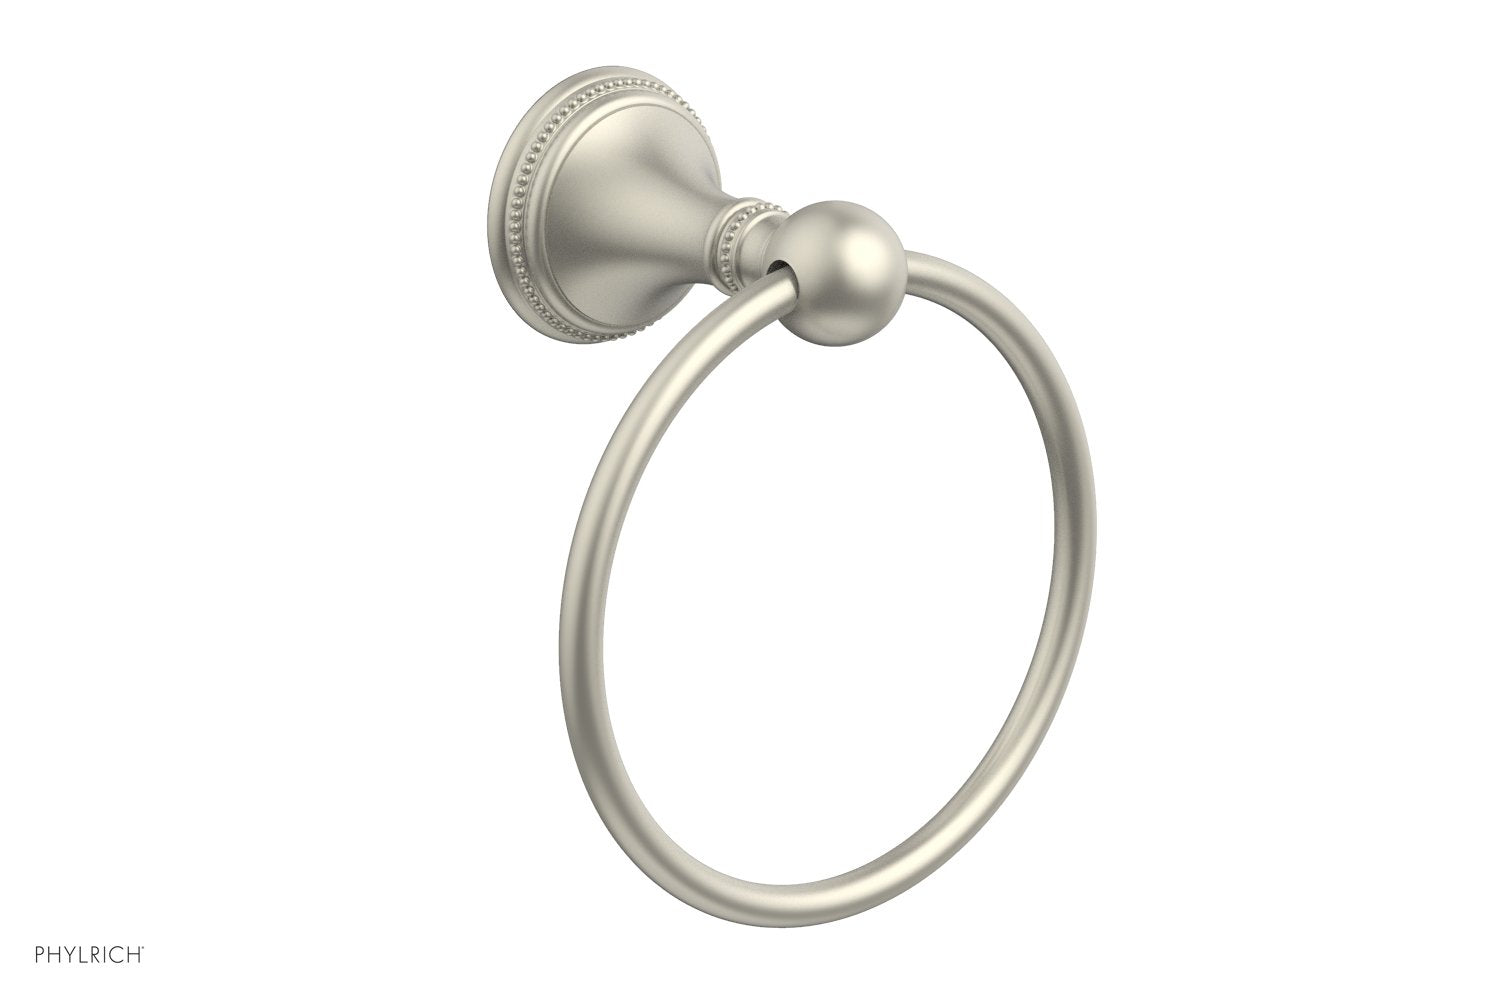 BEADED Towel Ring 207-75 - Phylrich